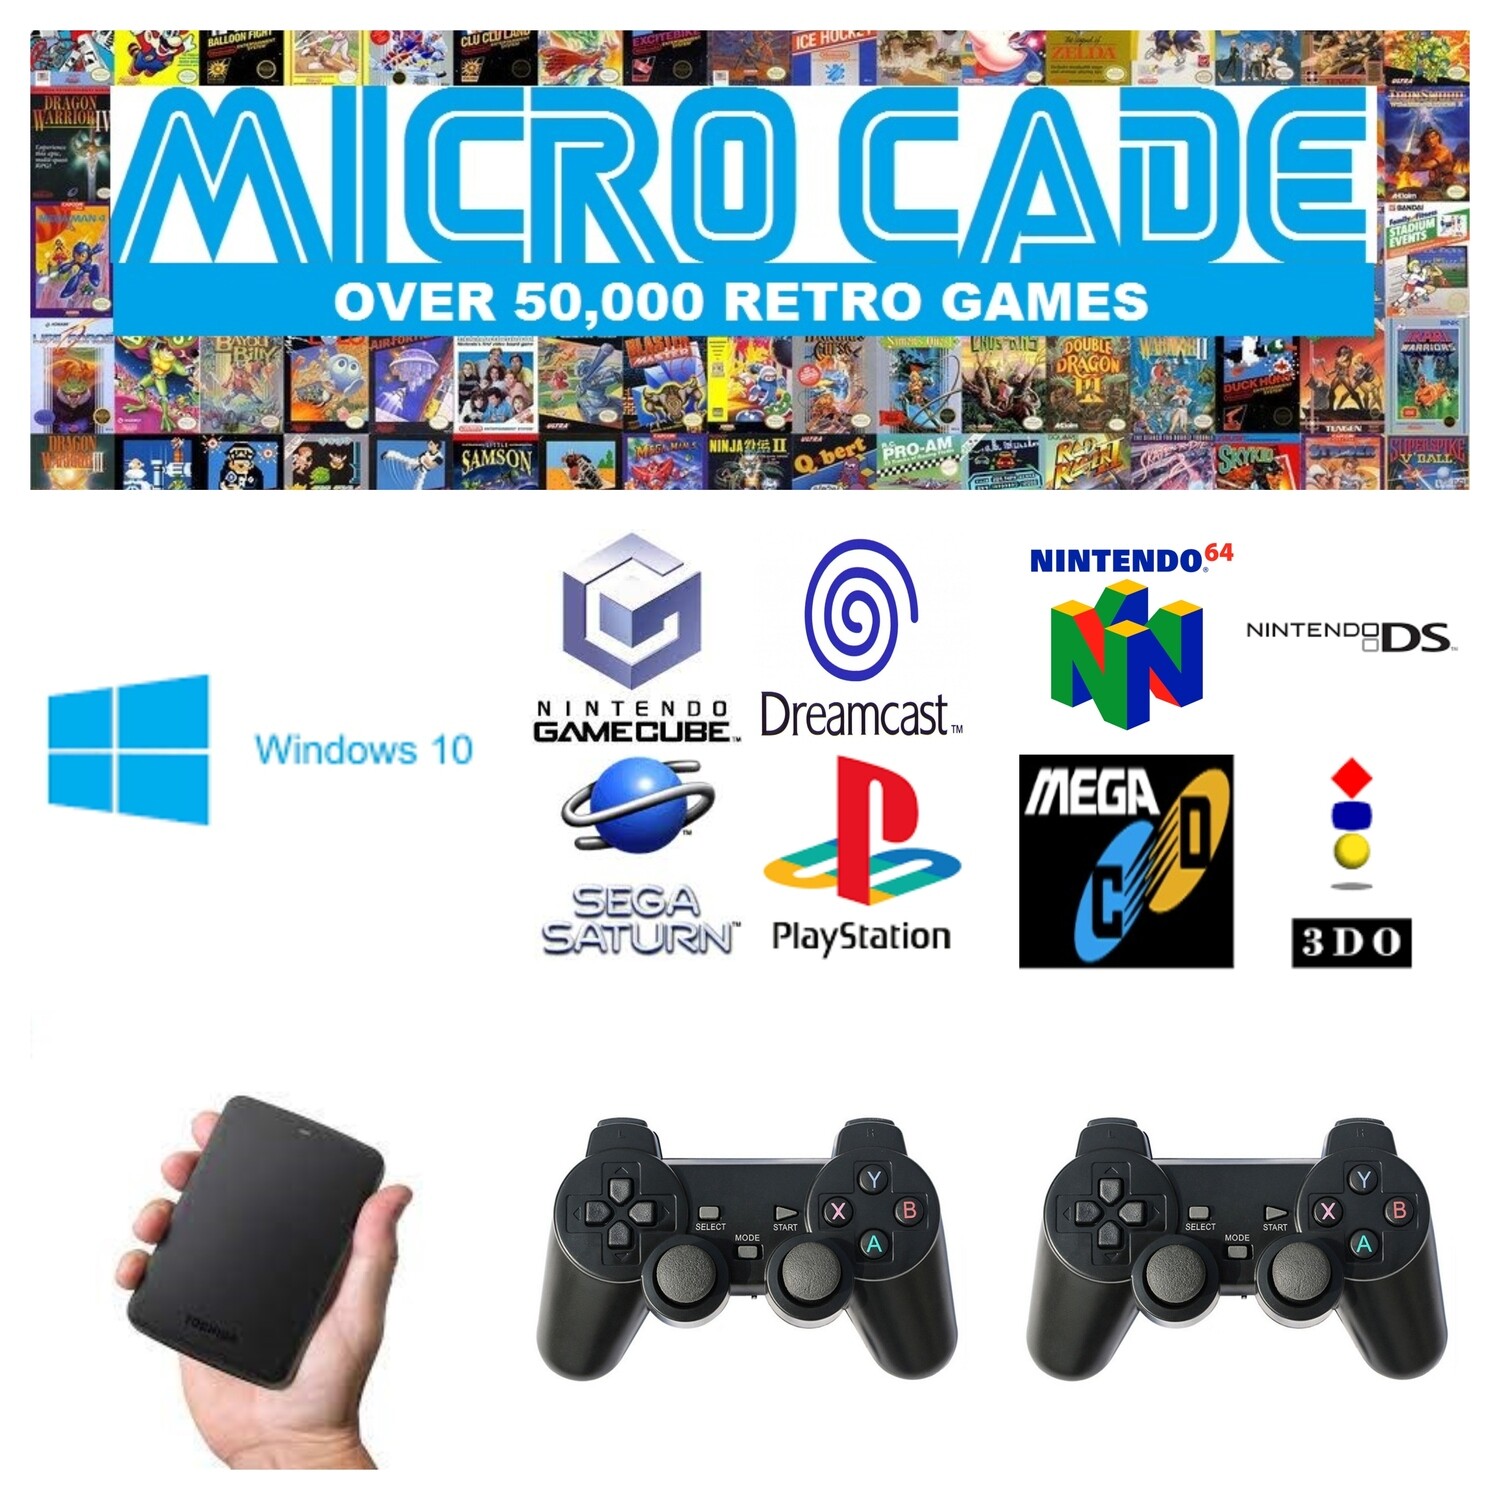 MICRO CADE OVER 35,000 RETRO GAMES WITH 2 X PS CONTROLLERS AND 2 X SNES  CONTROLLERS